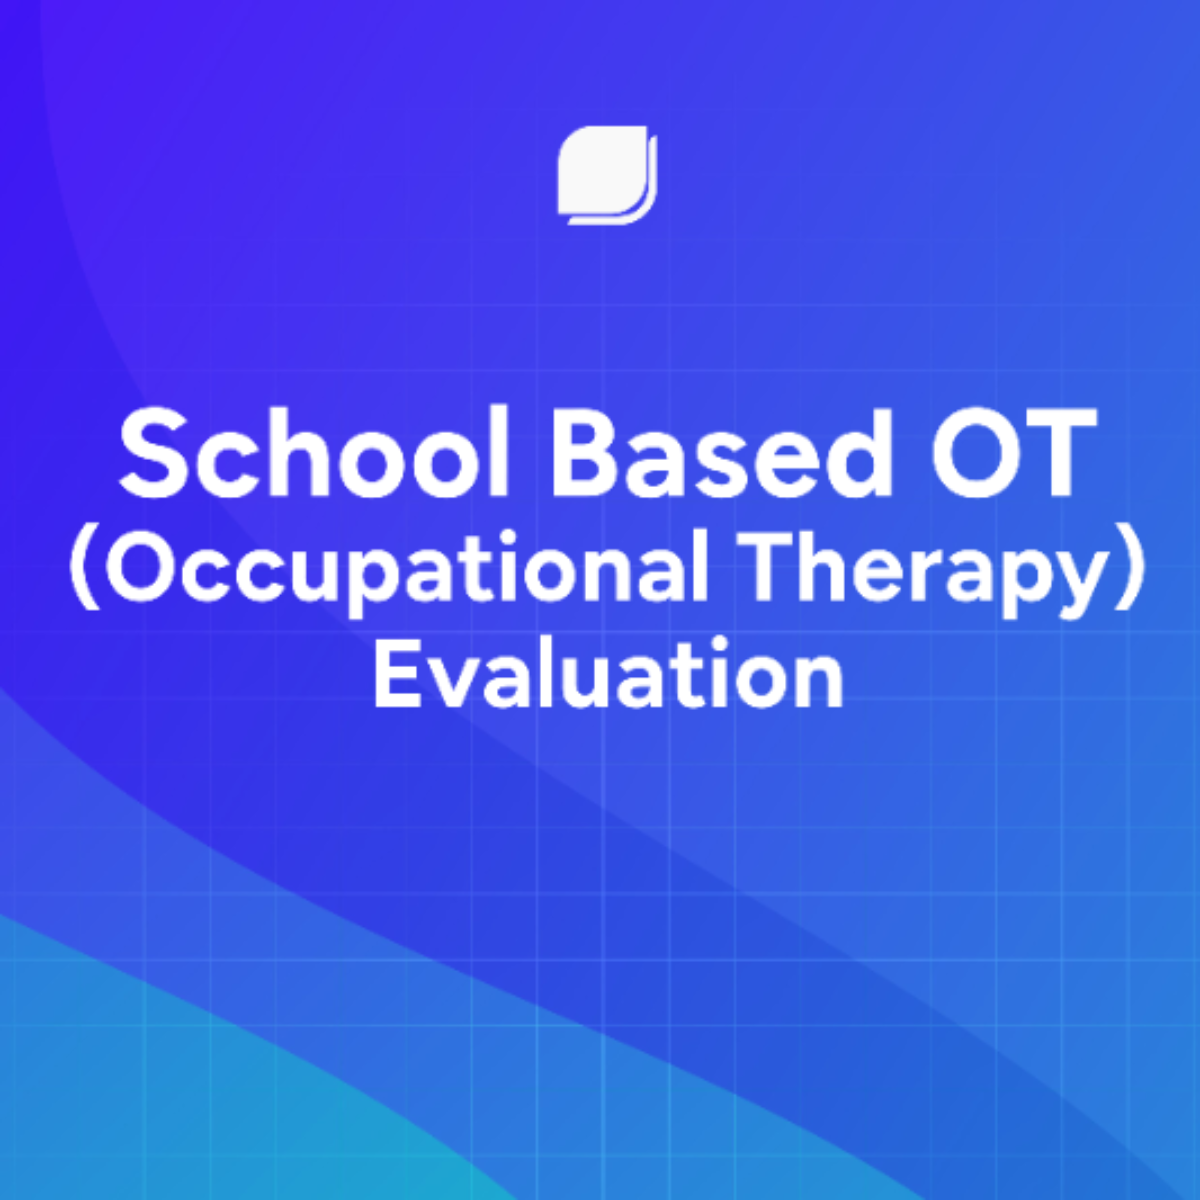 School Based Ot(Occupational Therapy) Evaluation Template